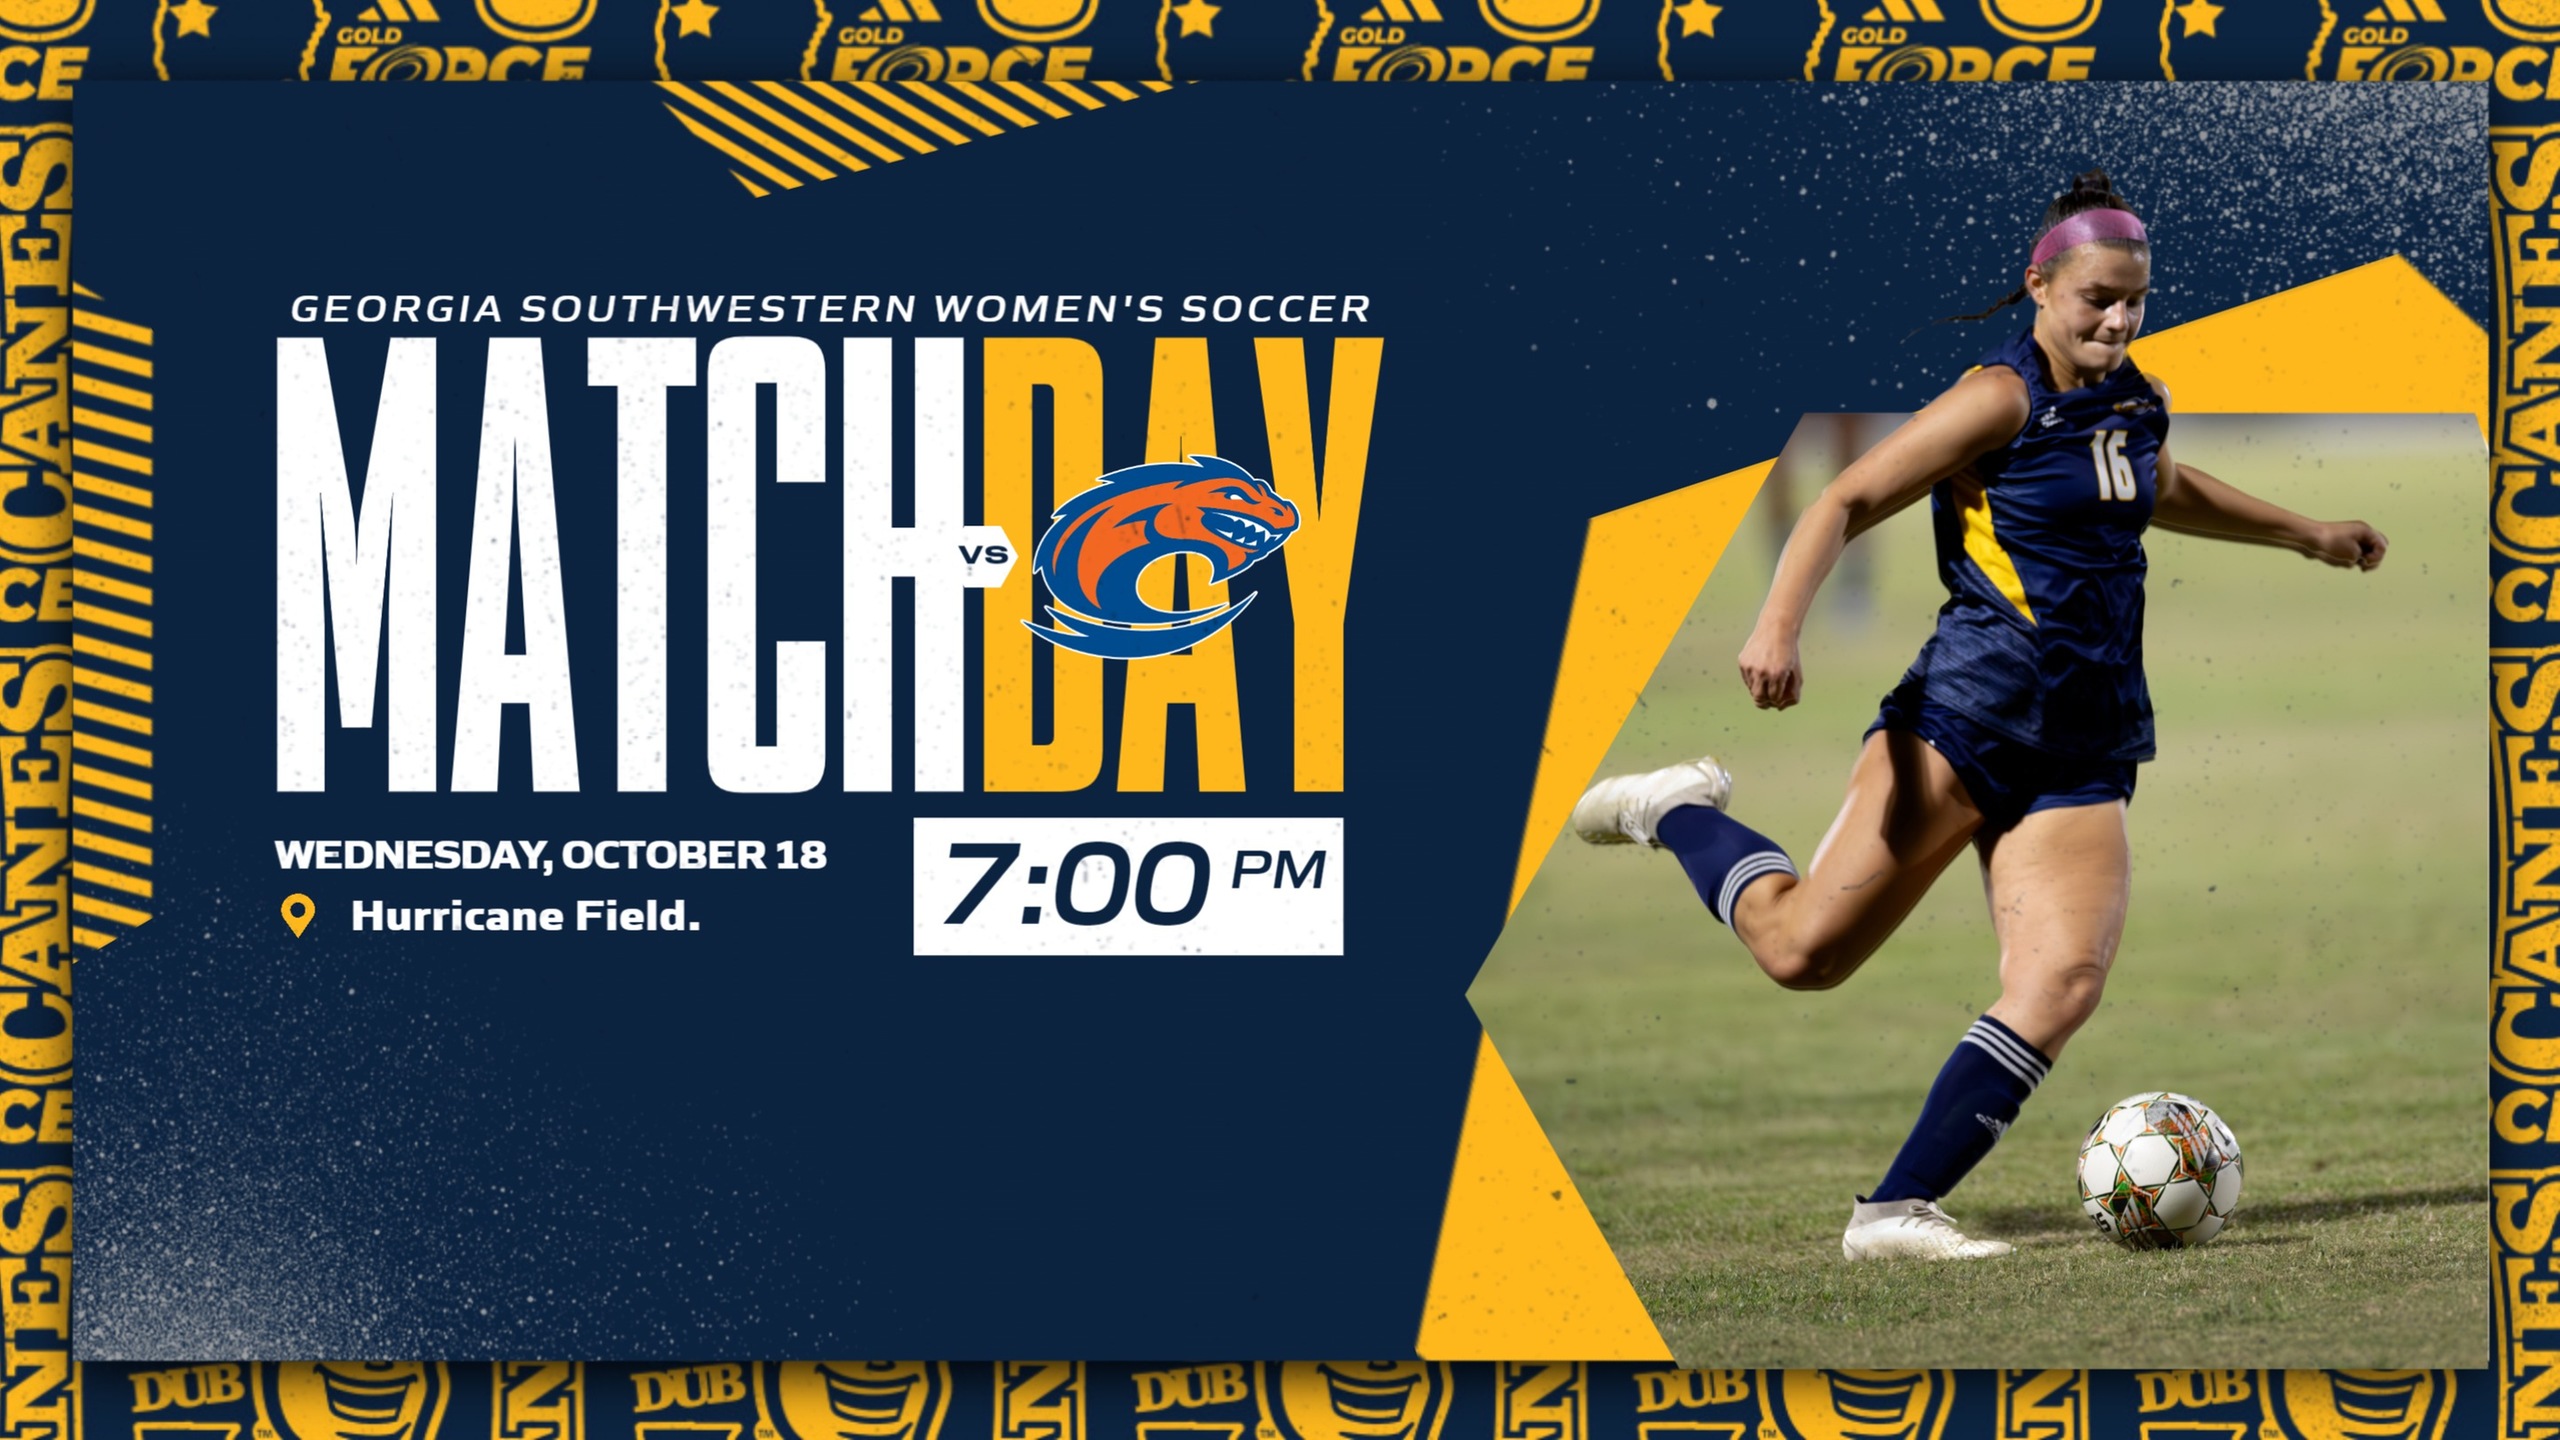 Home Finale Wednesday: Women's Soccer vs. Clayton State